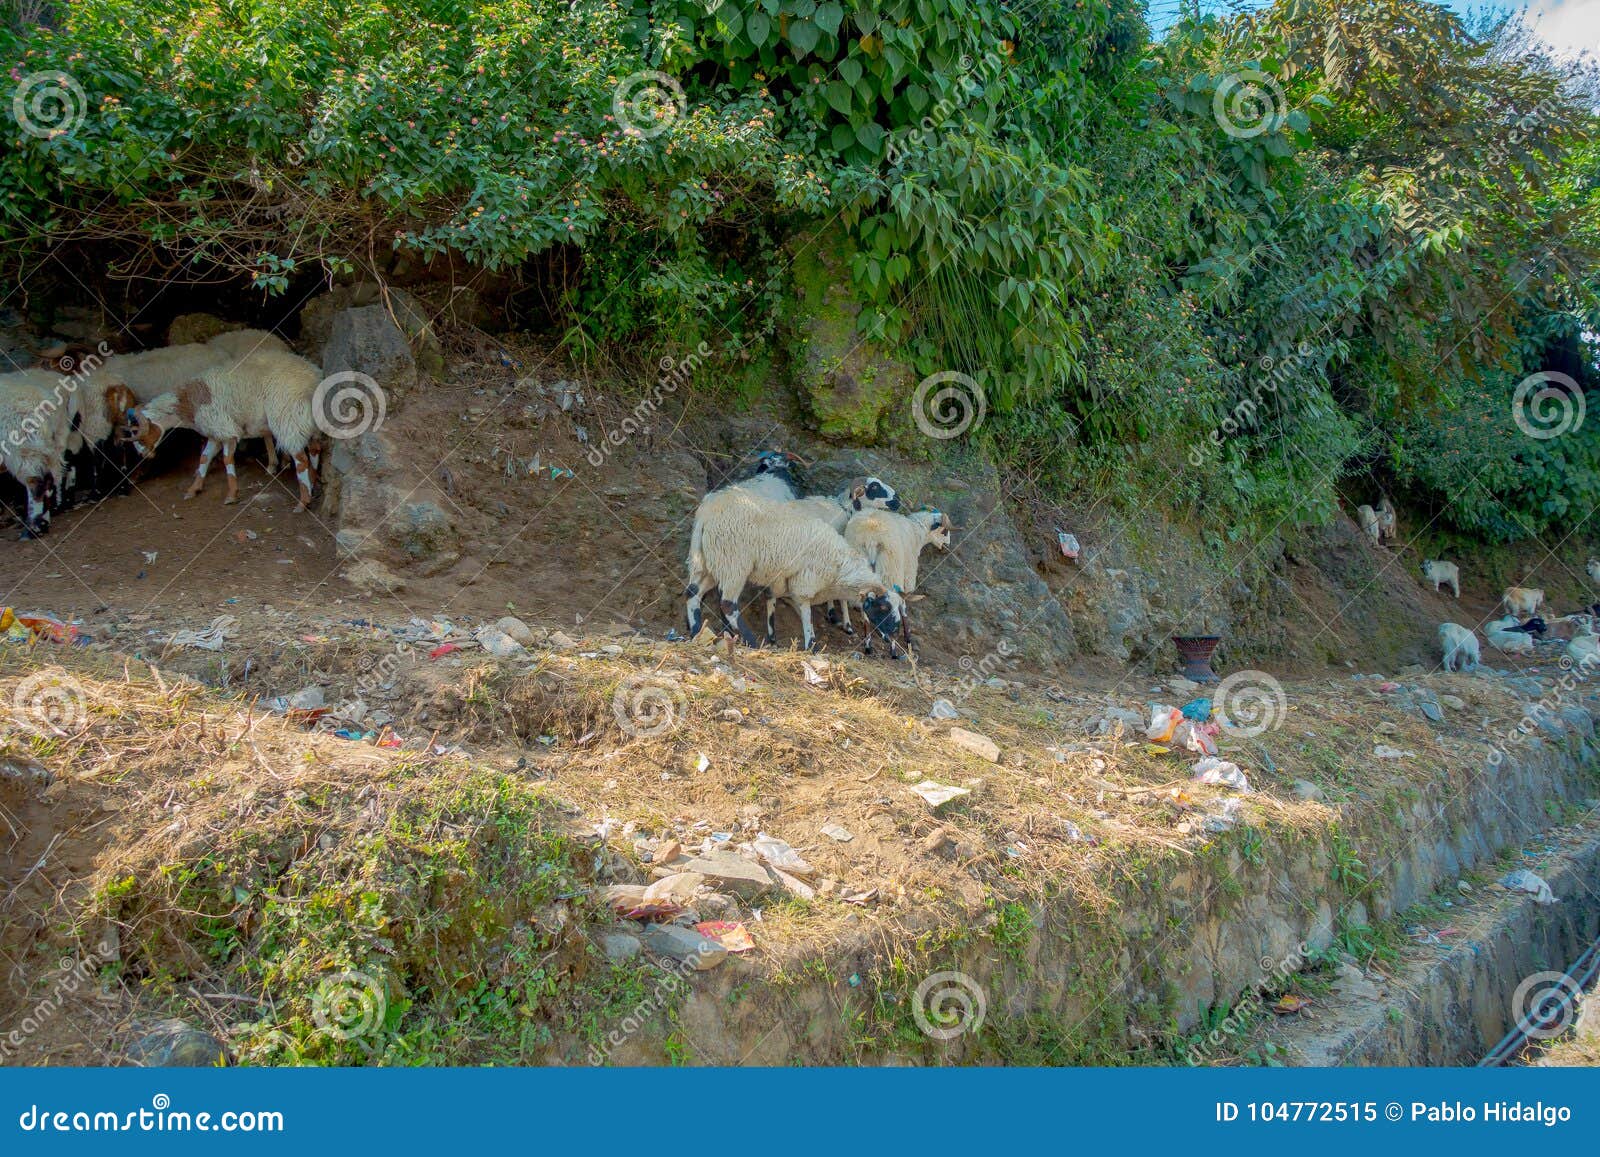 Flock Of Goats Going Along The Street Of Small Town Muktinath In Nepal